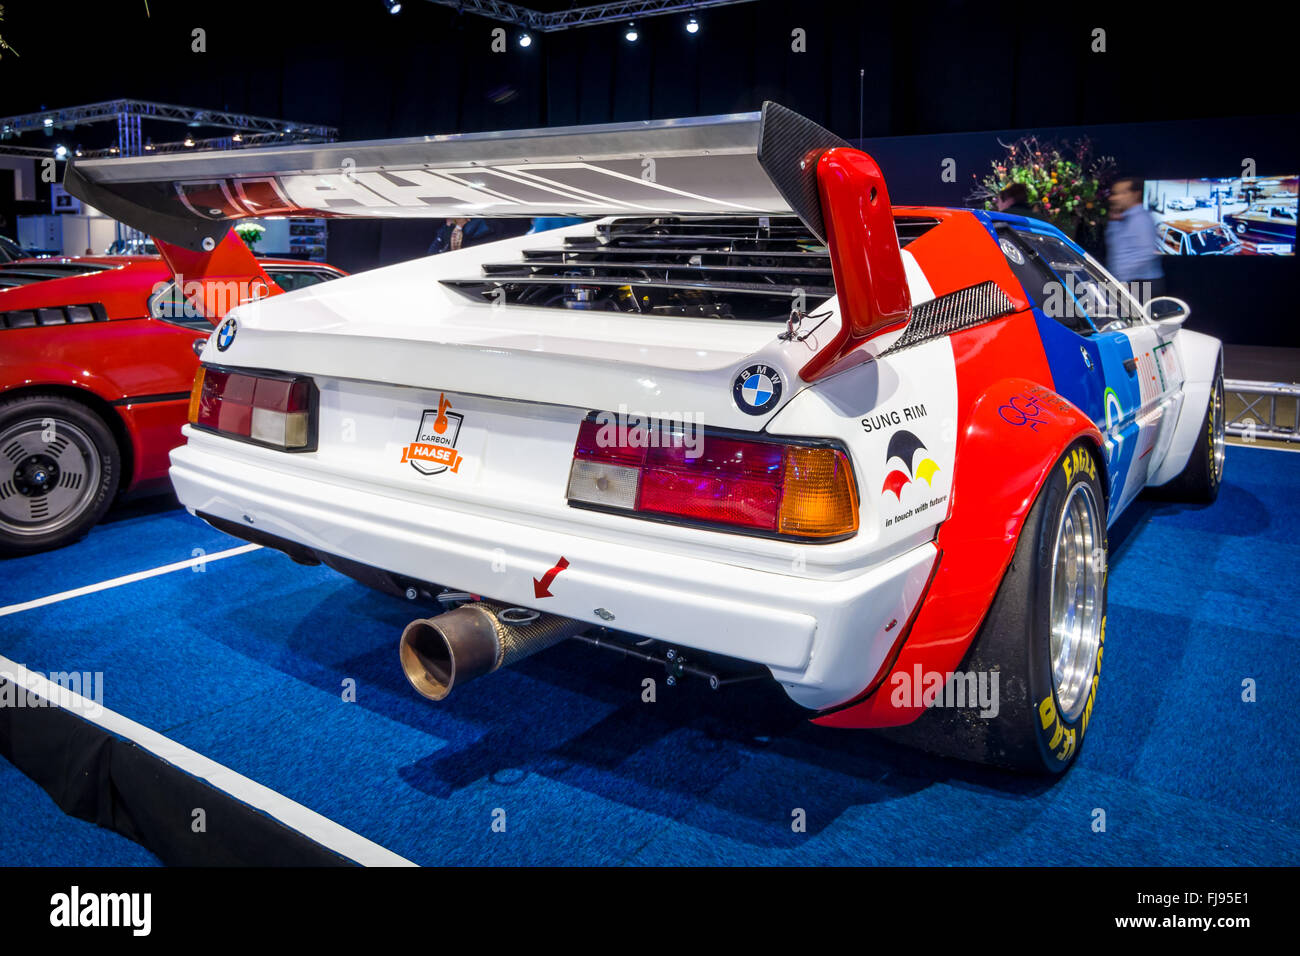 Sports car BMW M1 Procar (racing version of the BMW M1), 1980. Rear view. Stock Photo